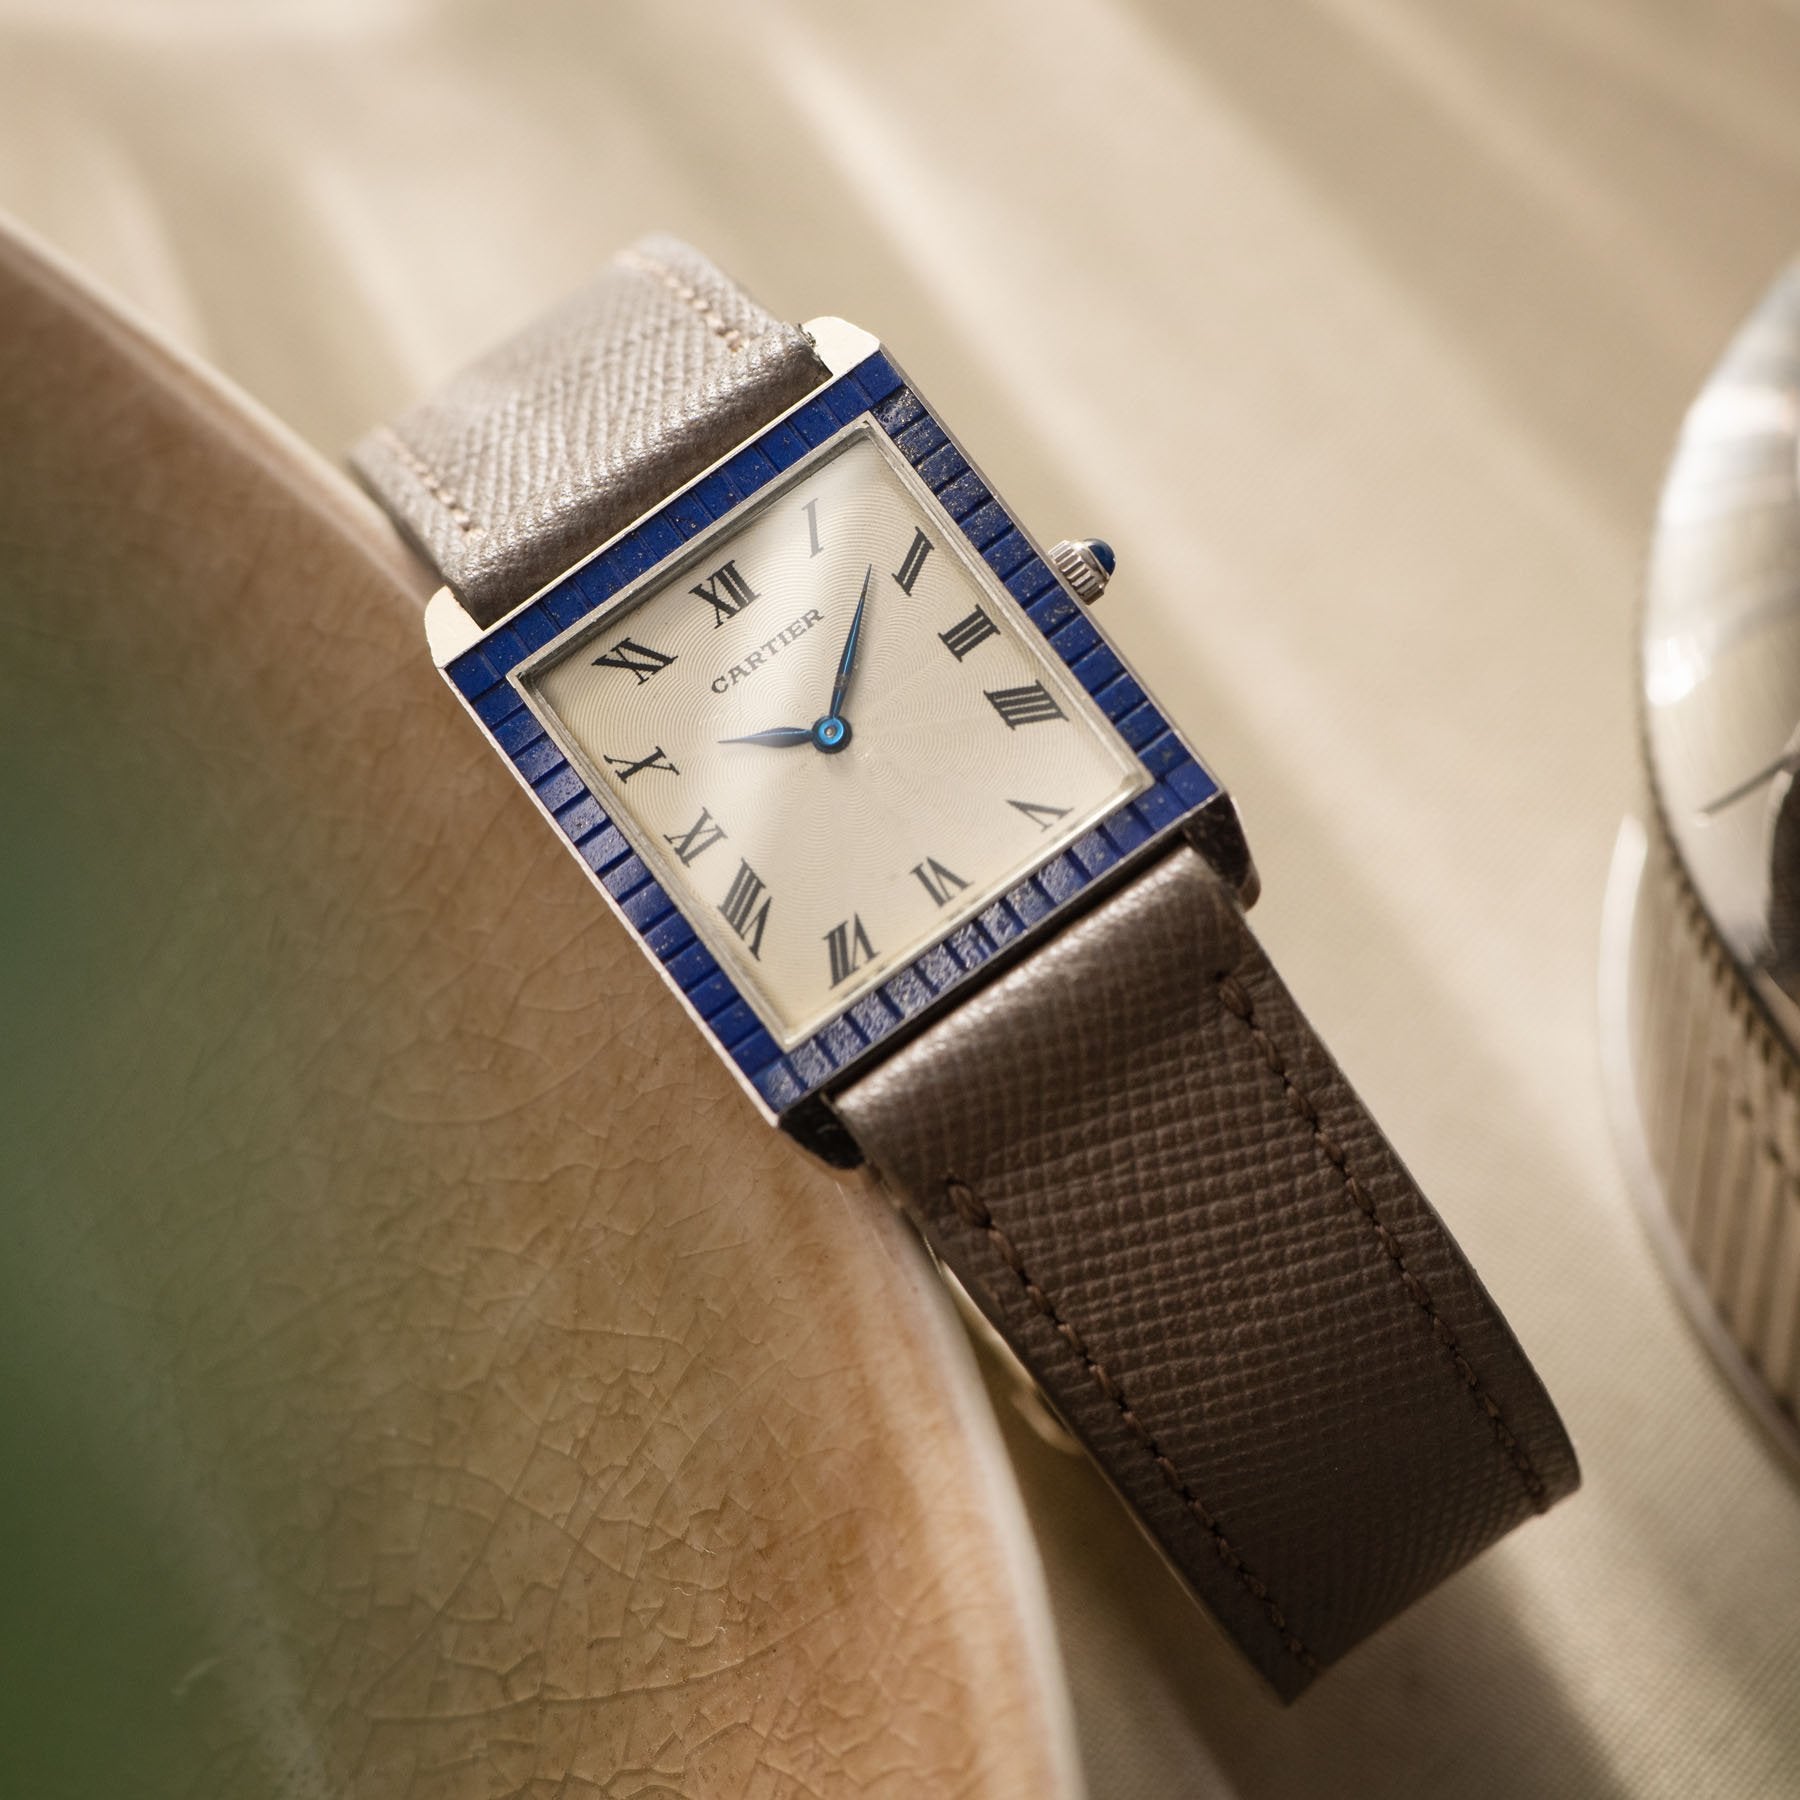 Cartier by Piaget White Gold and Lapis Lazuli watch